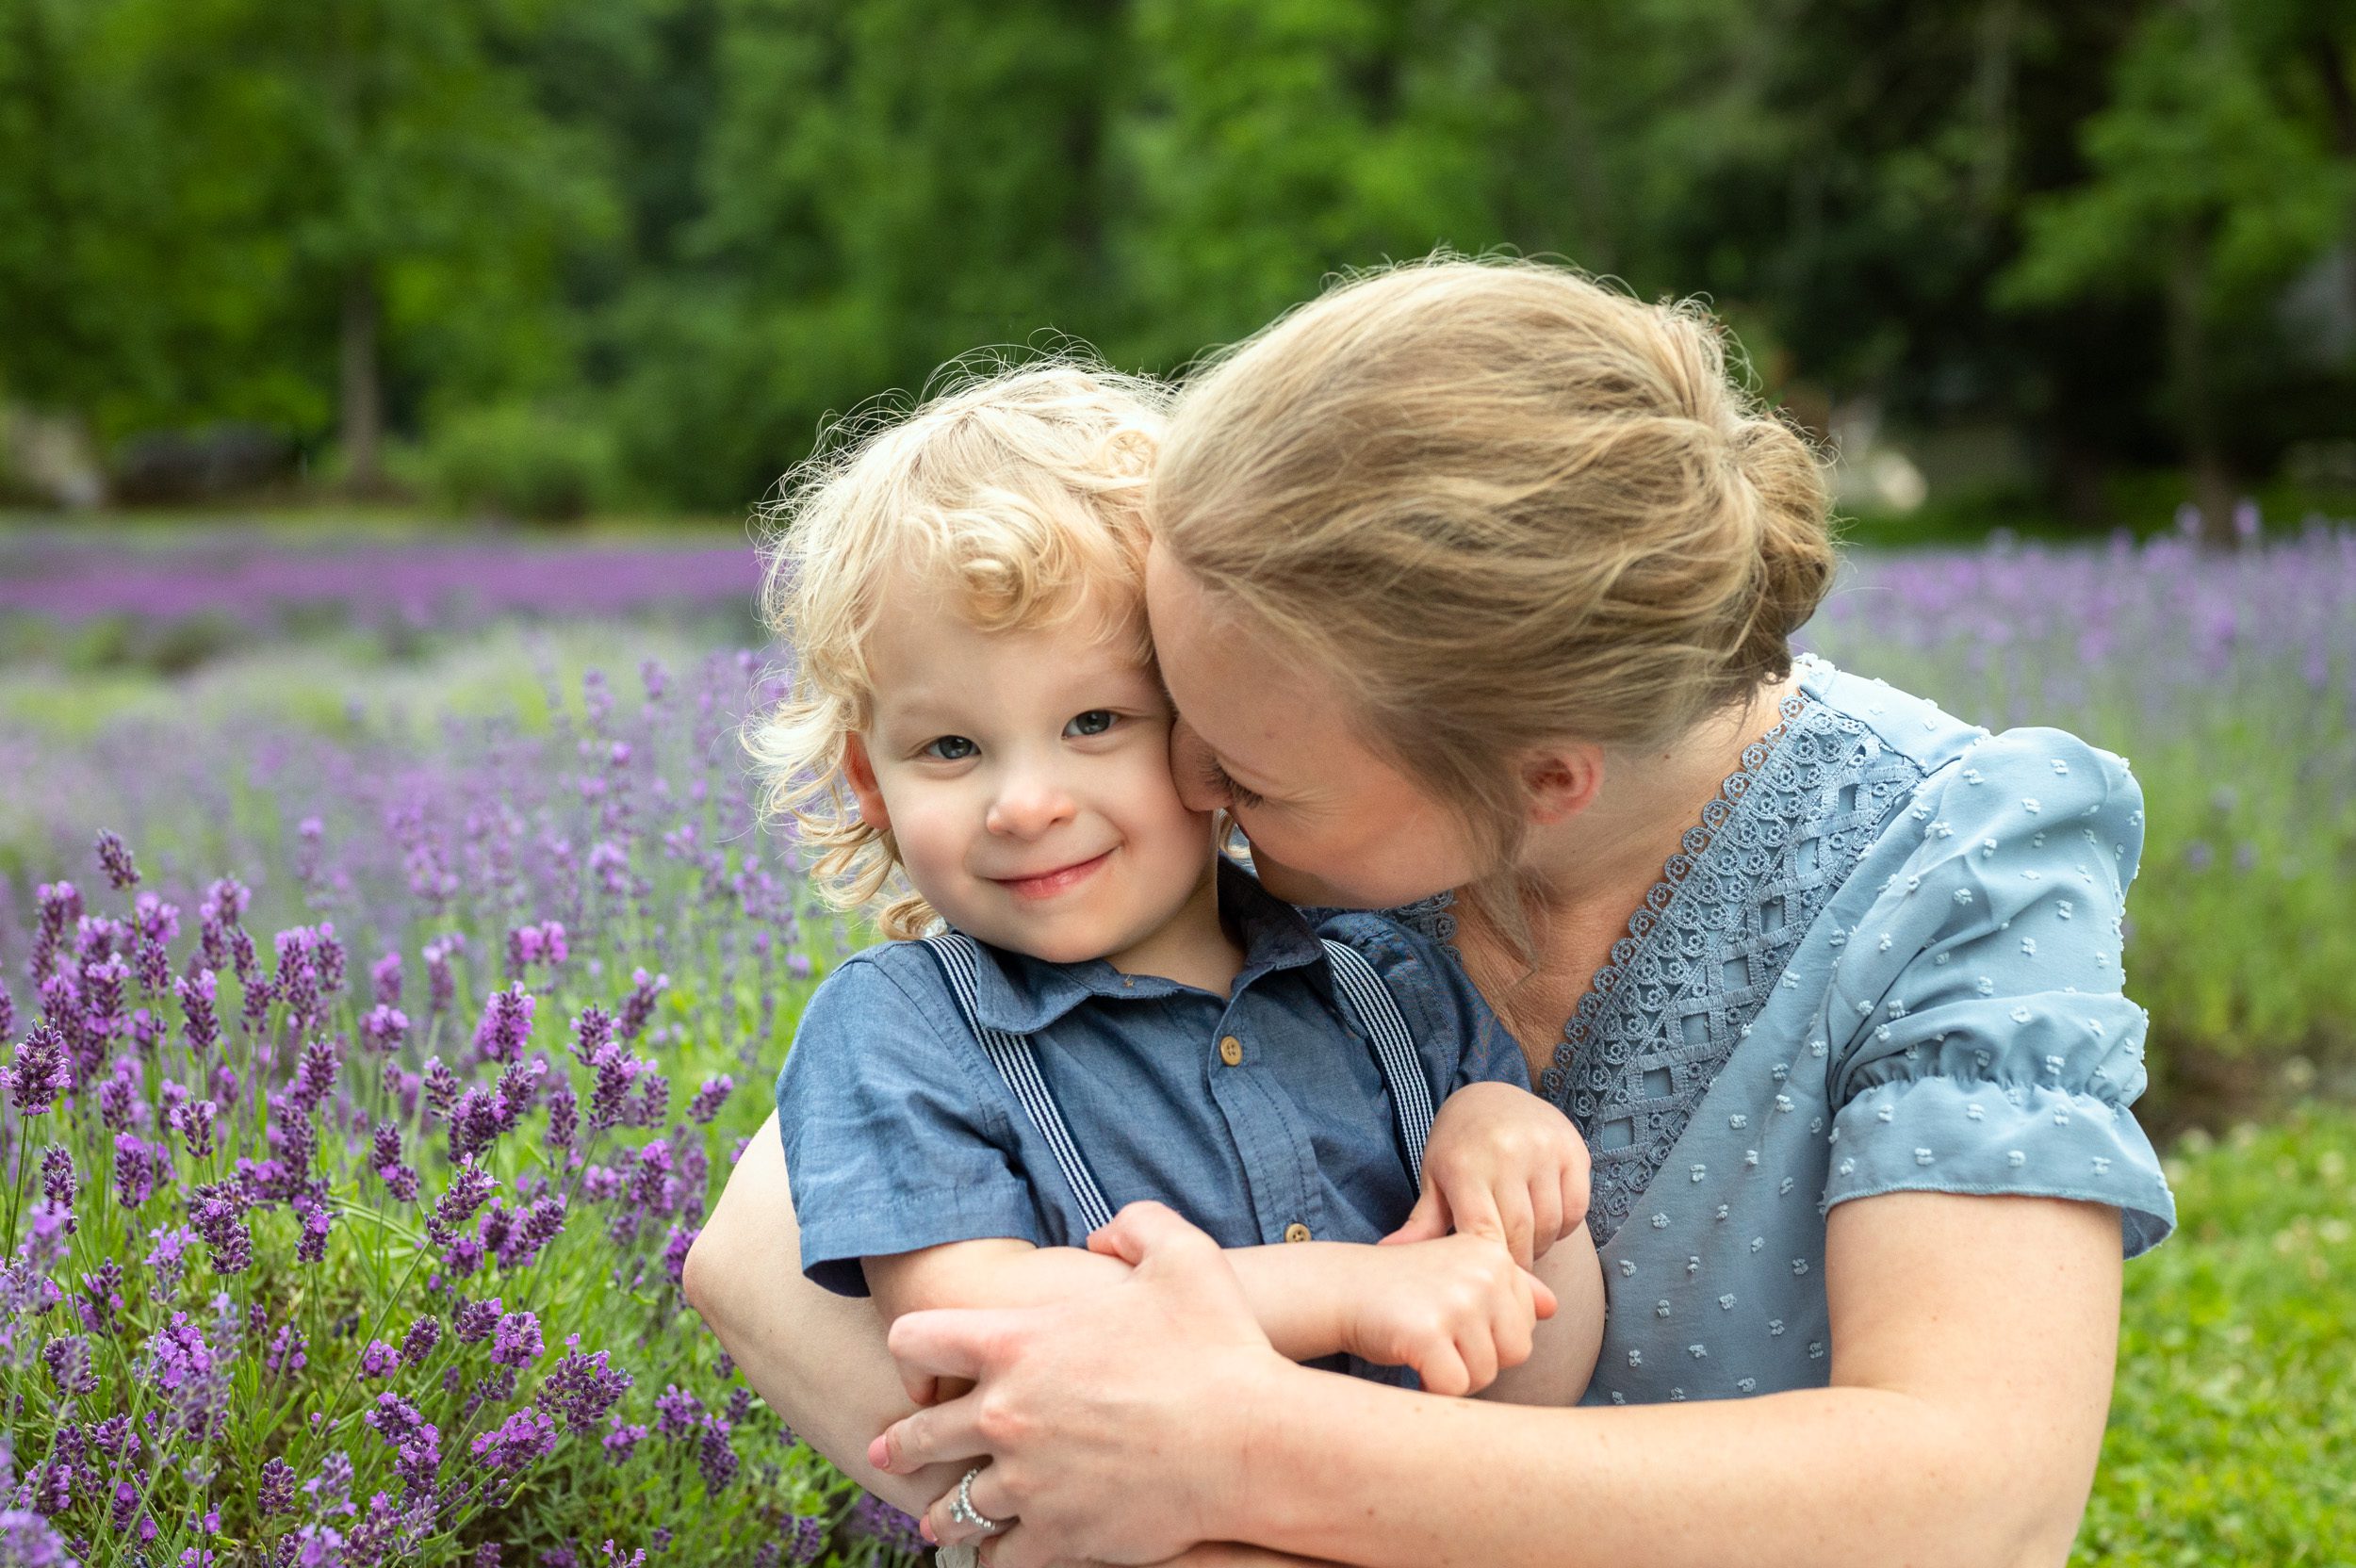 a mom kissing her young son on the cheek in a field of purple lavender during a family photo session